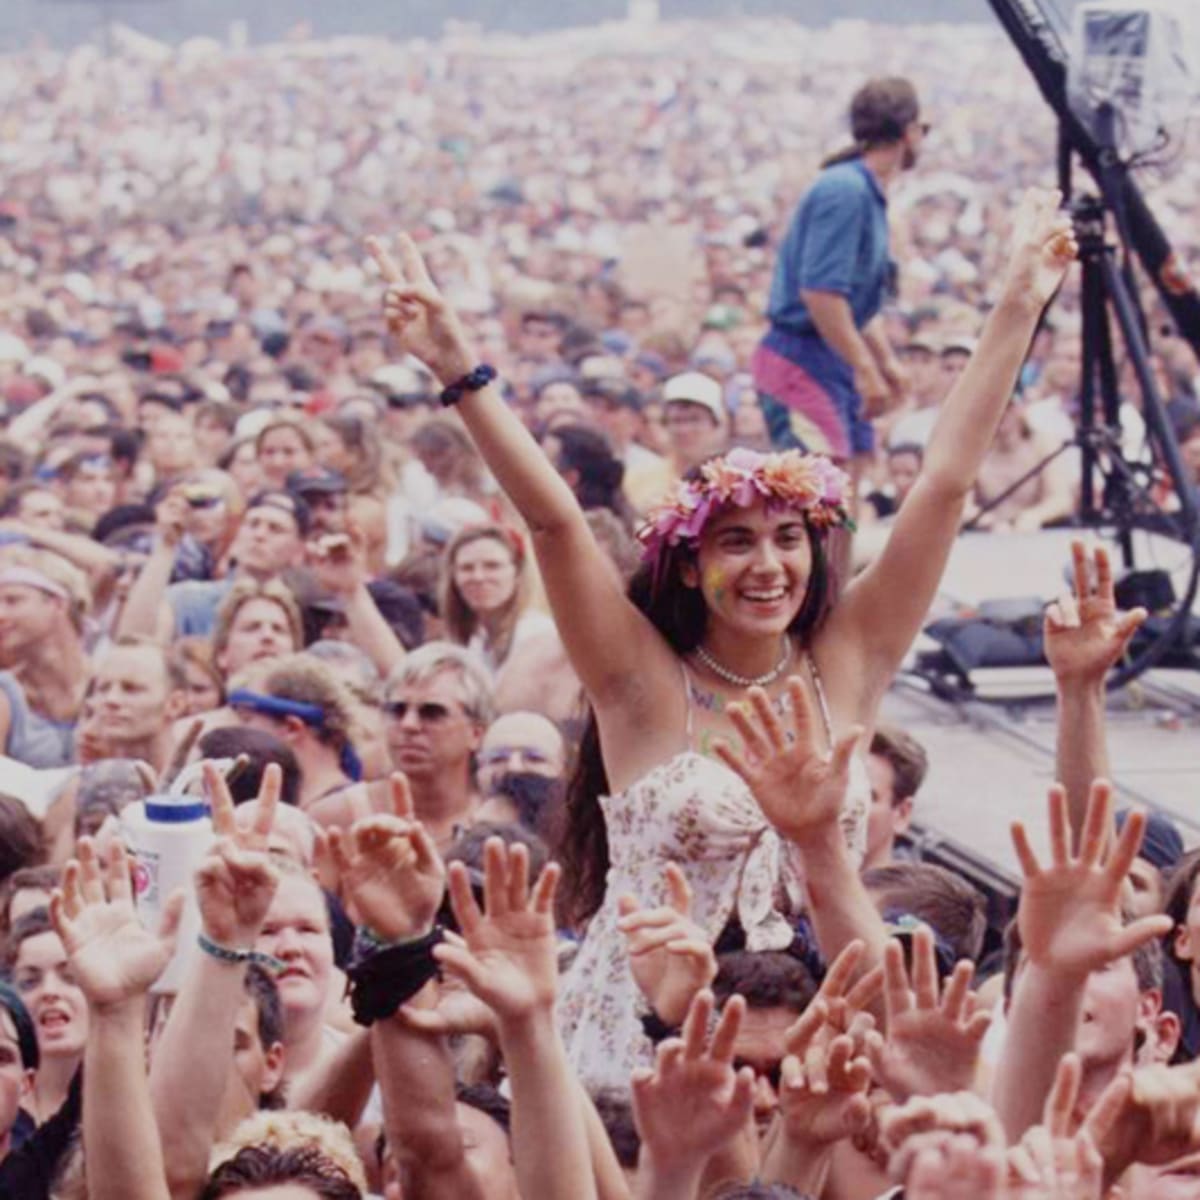 Woodstock Music Festival Has Been Resurrected For Its 50th Anniversary -   - The Latest Electronic Dance Music News, Reviews & Artists